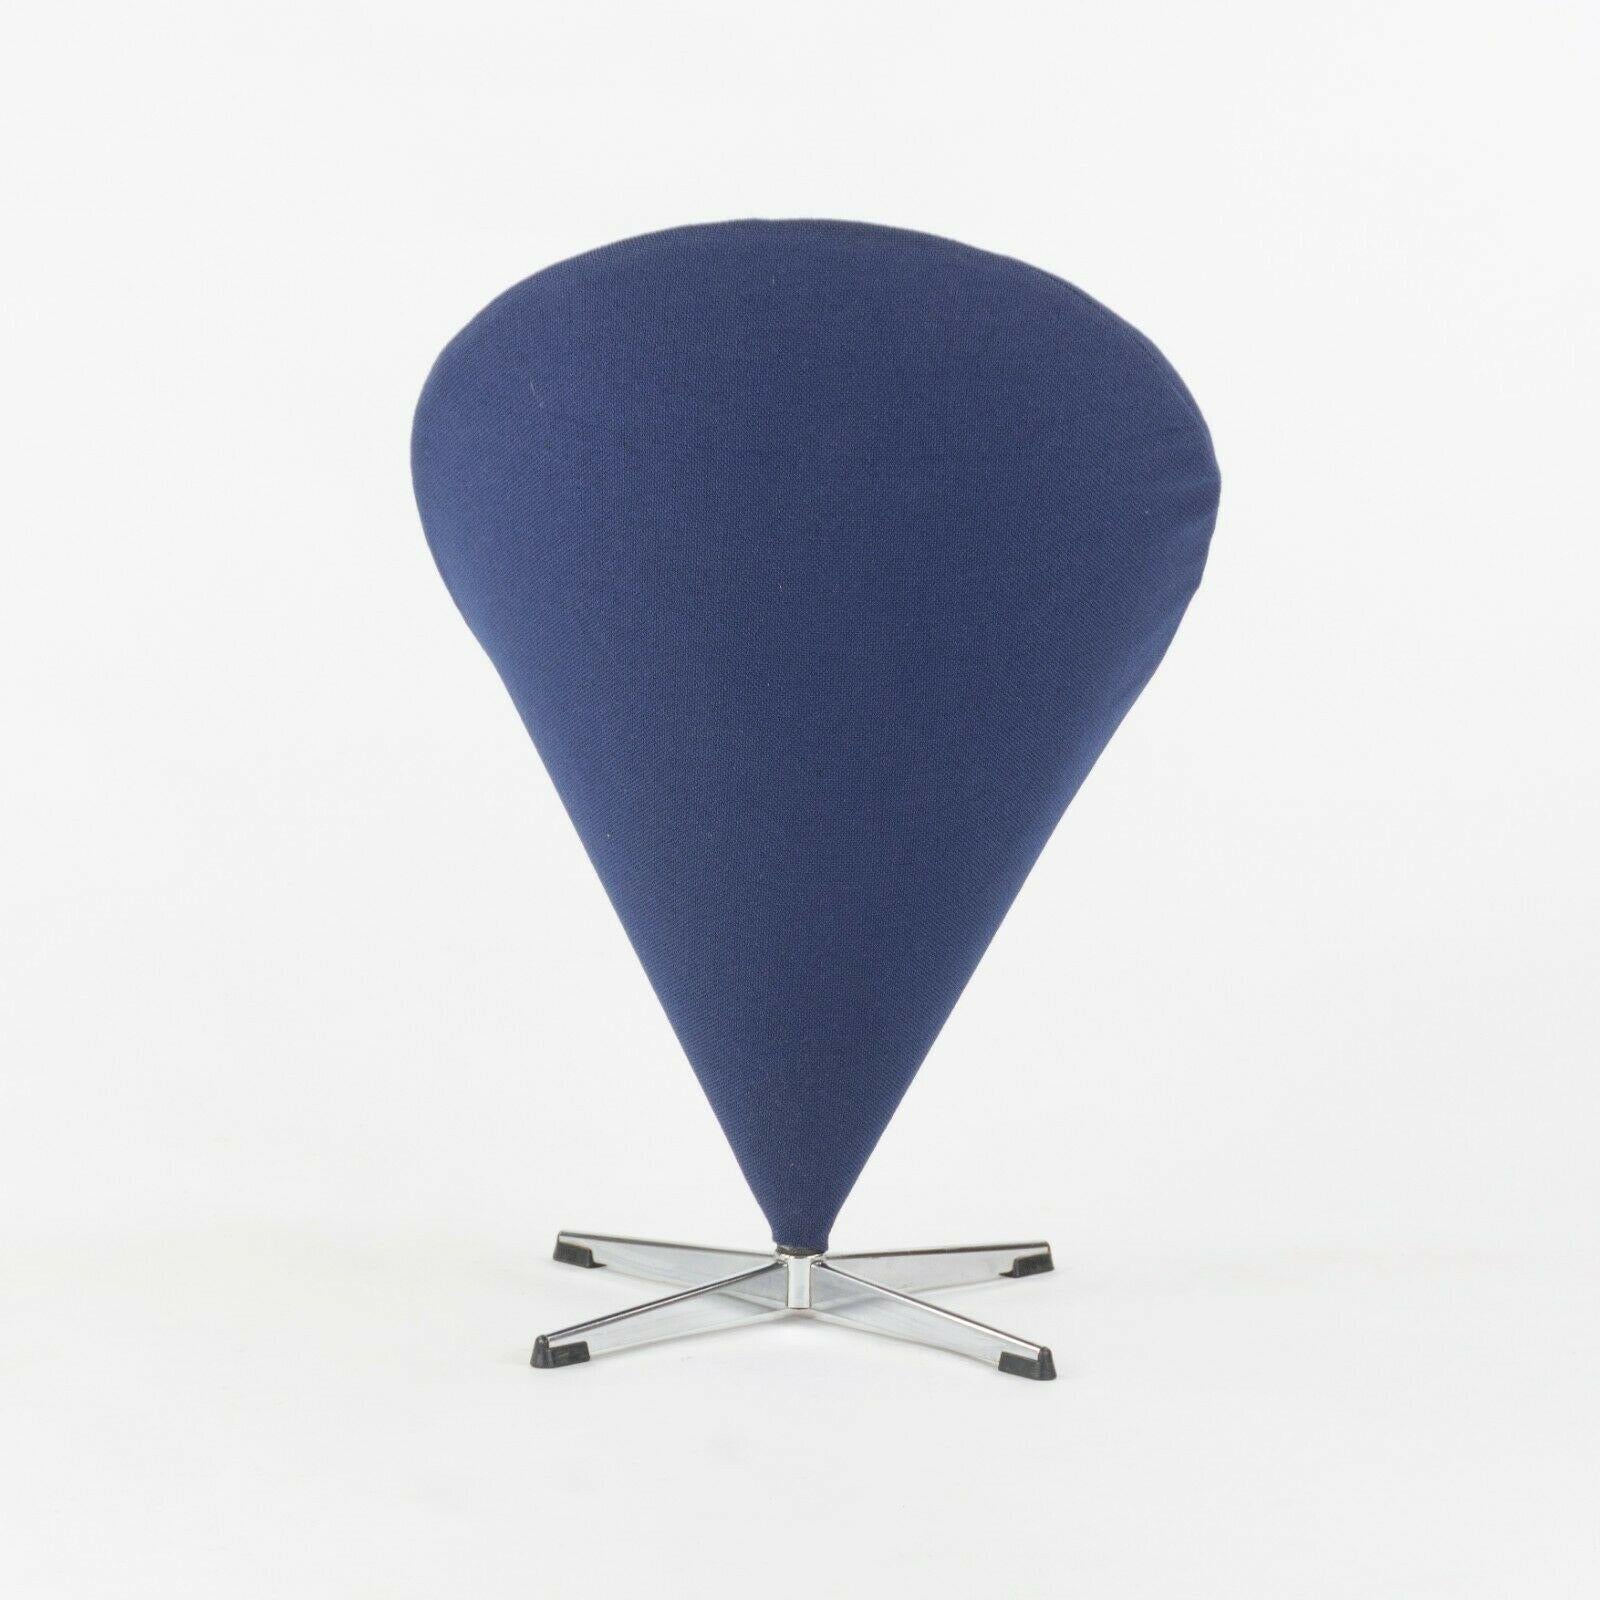 Modern 1960s Verner Panton Cone Chair Blue Fabric Made in Denmark for Plus-Linje Vitra